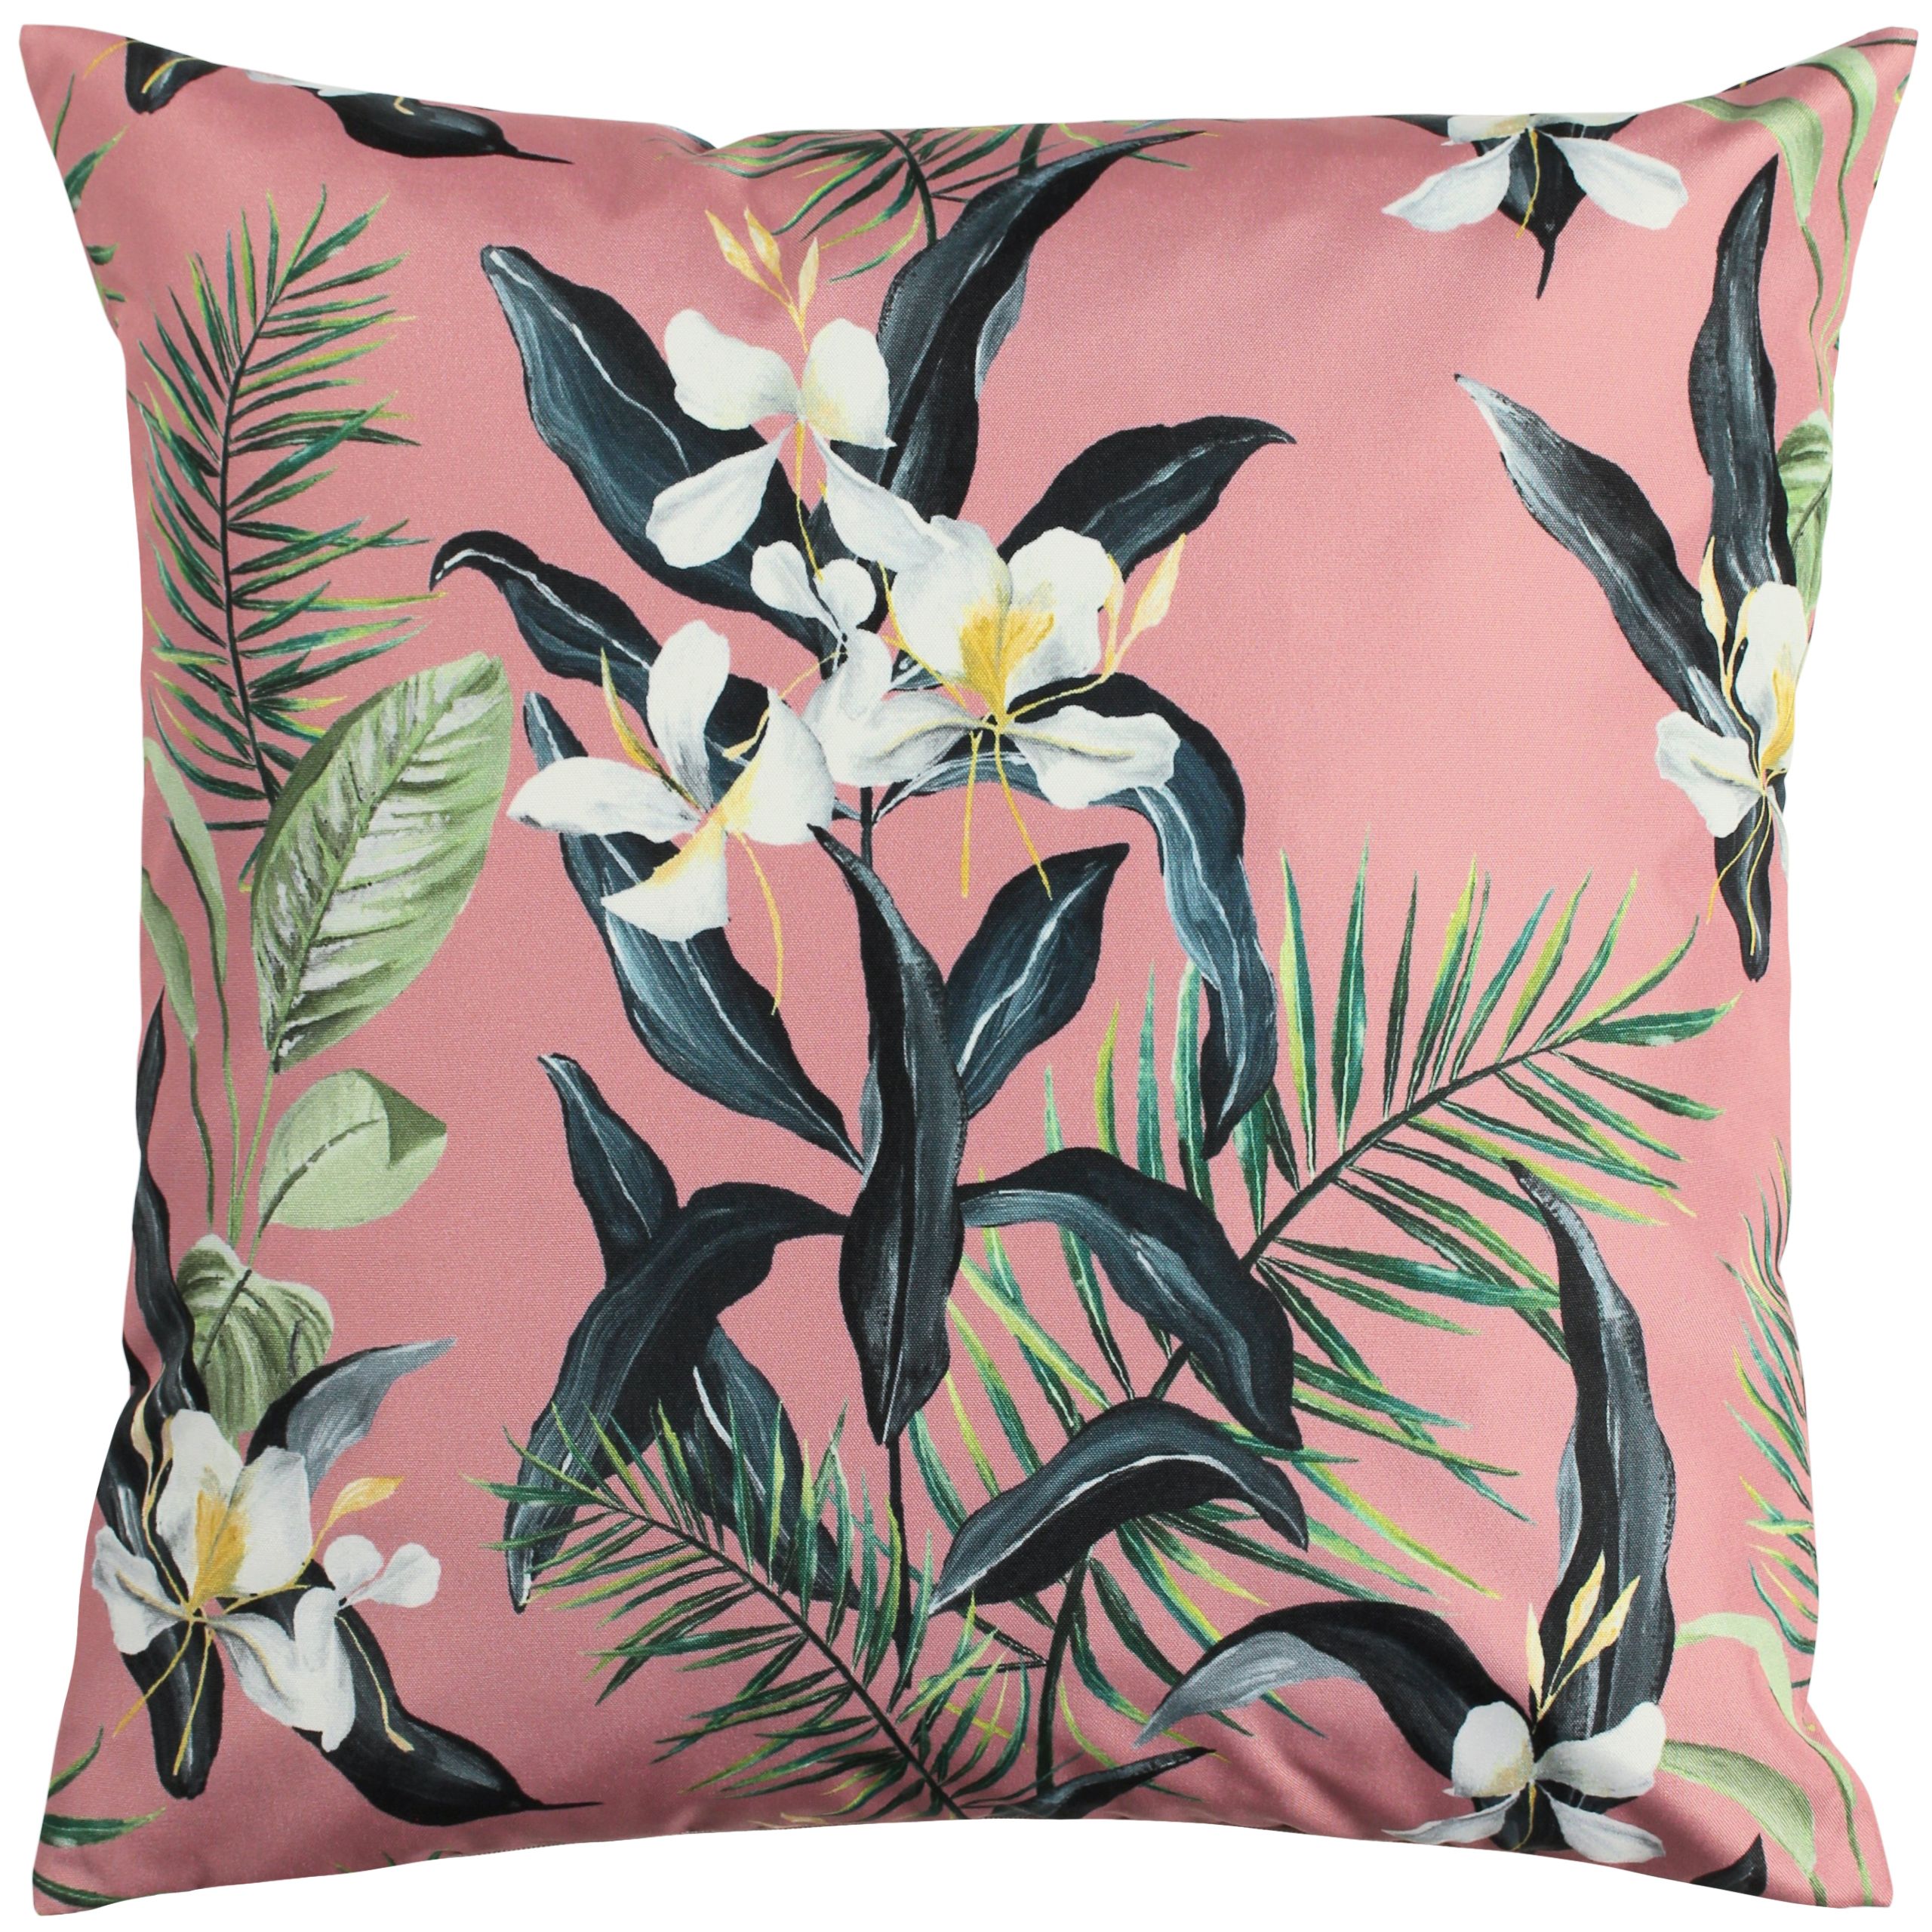 Inspired by the capital of Hawaii, Honolulu, this outdoor cushion features an intricate design of blooms and foliage in their natural colours.